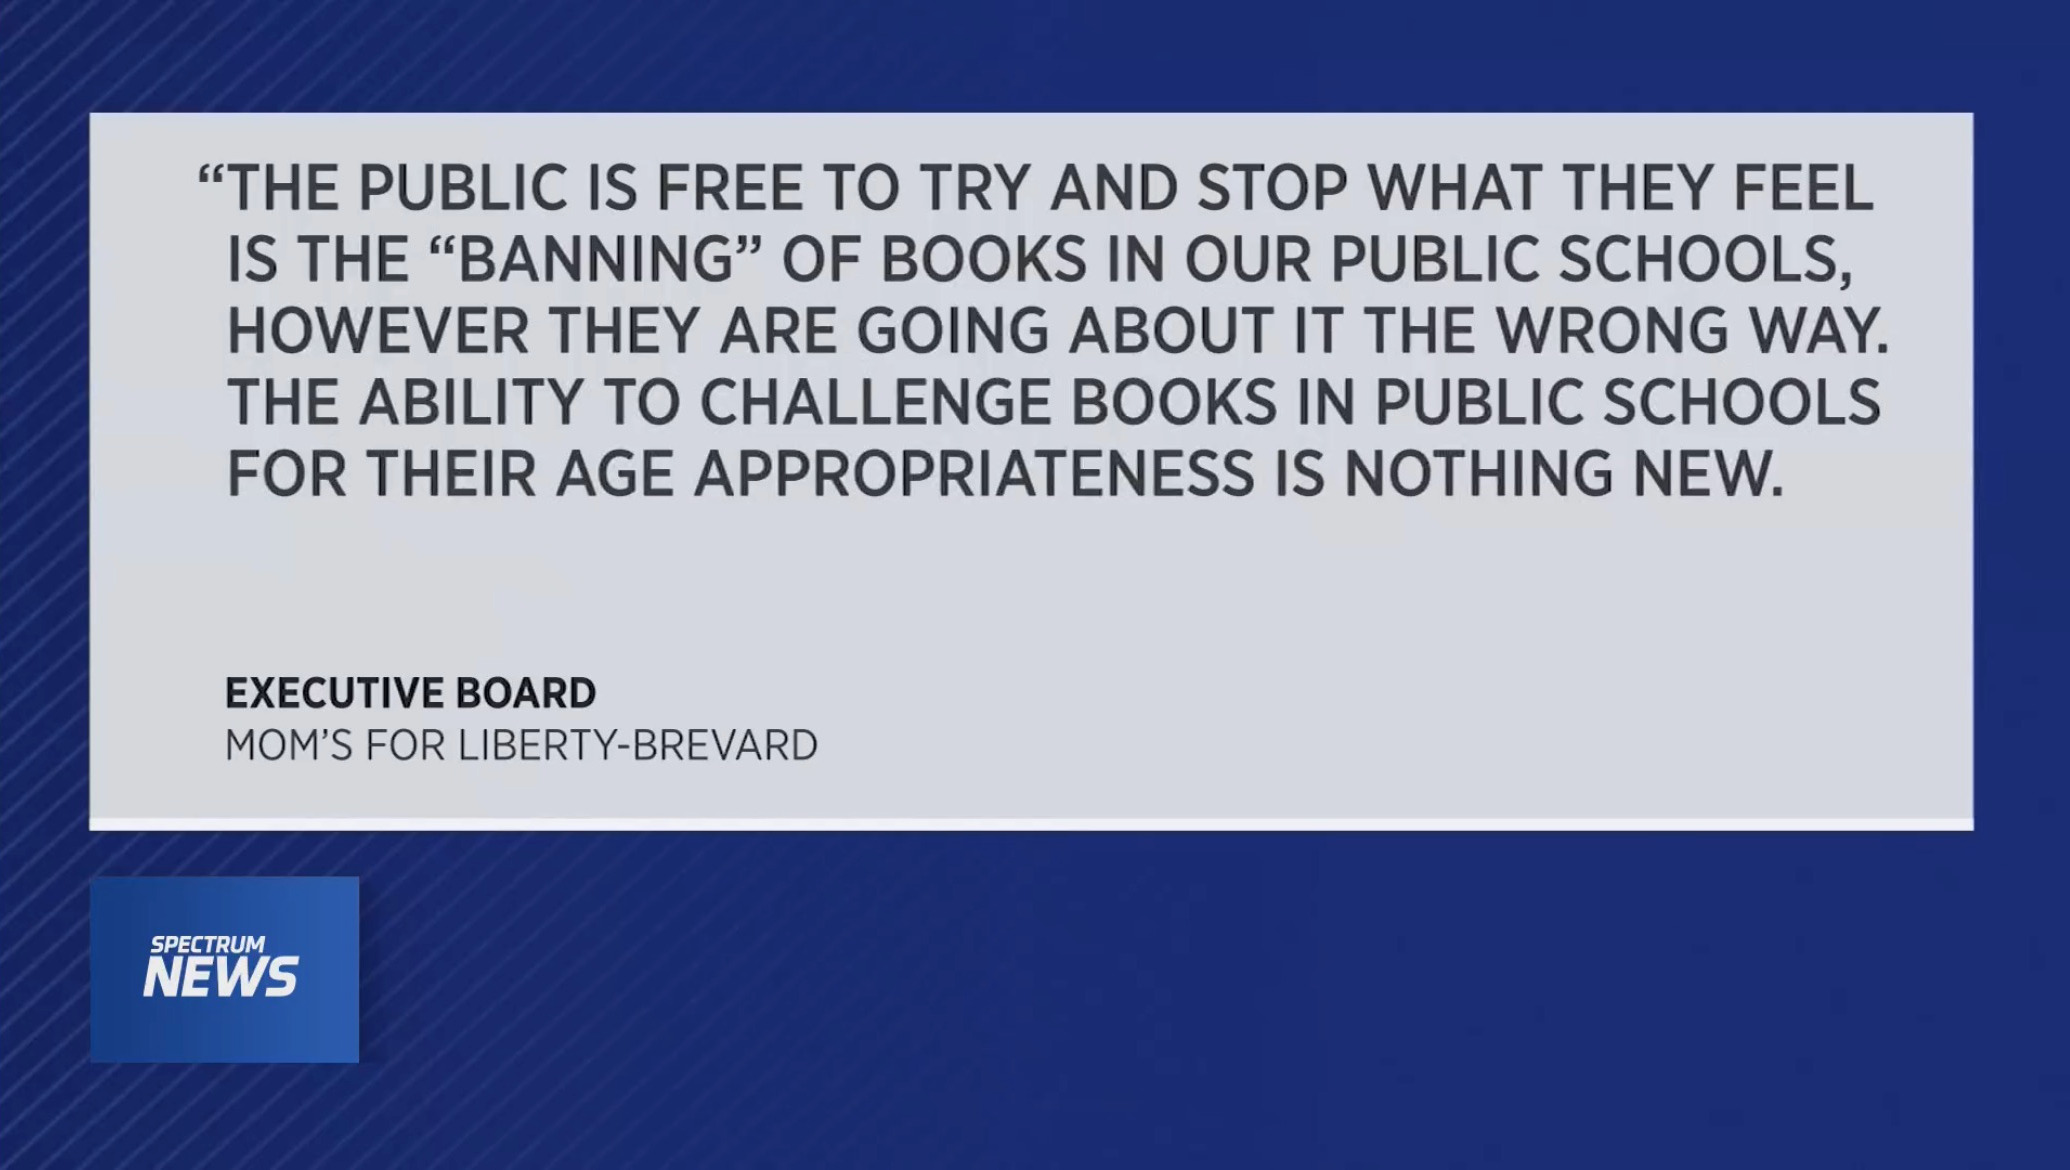 THE PUBLIC IS FREE TO TRY AND STOP WHAT THEY FEEL IS THE 'BANNING' OF BOOKS IN OUR PUBLIC SCHOOLS, HOWEVER THEY ARE GOING ABOUT IT THE WRONG WAY. THE ABILITY TO CHALLENGE BOOKS IN PUBLIC SCHOOLS FOR THEIR AGE APPROPRIATENESS IS NOTHING NEW. EXECUTIVE BOARD MOM'S FOR LIBERTY-BREVARD